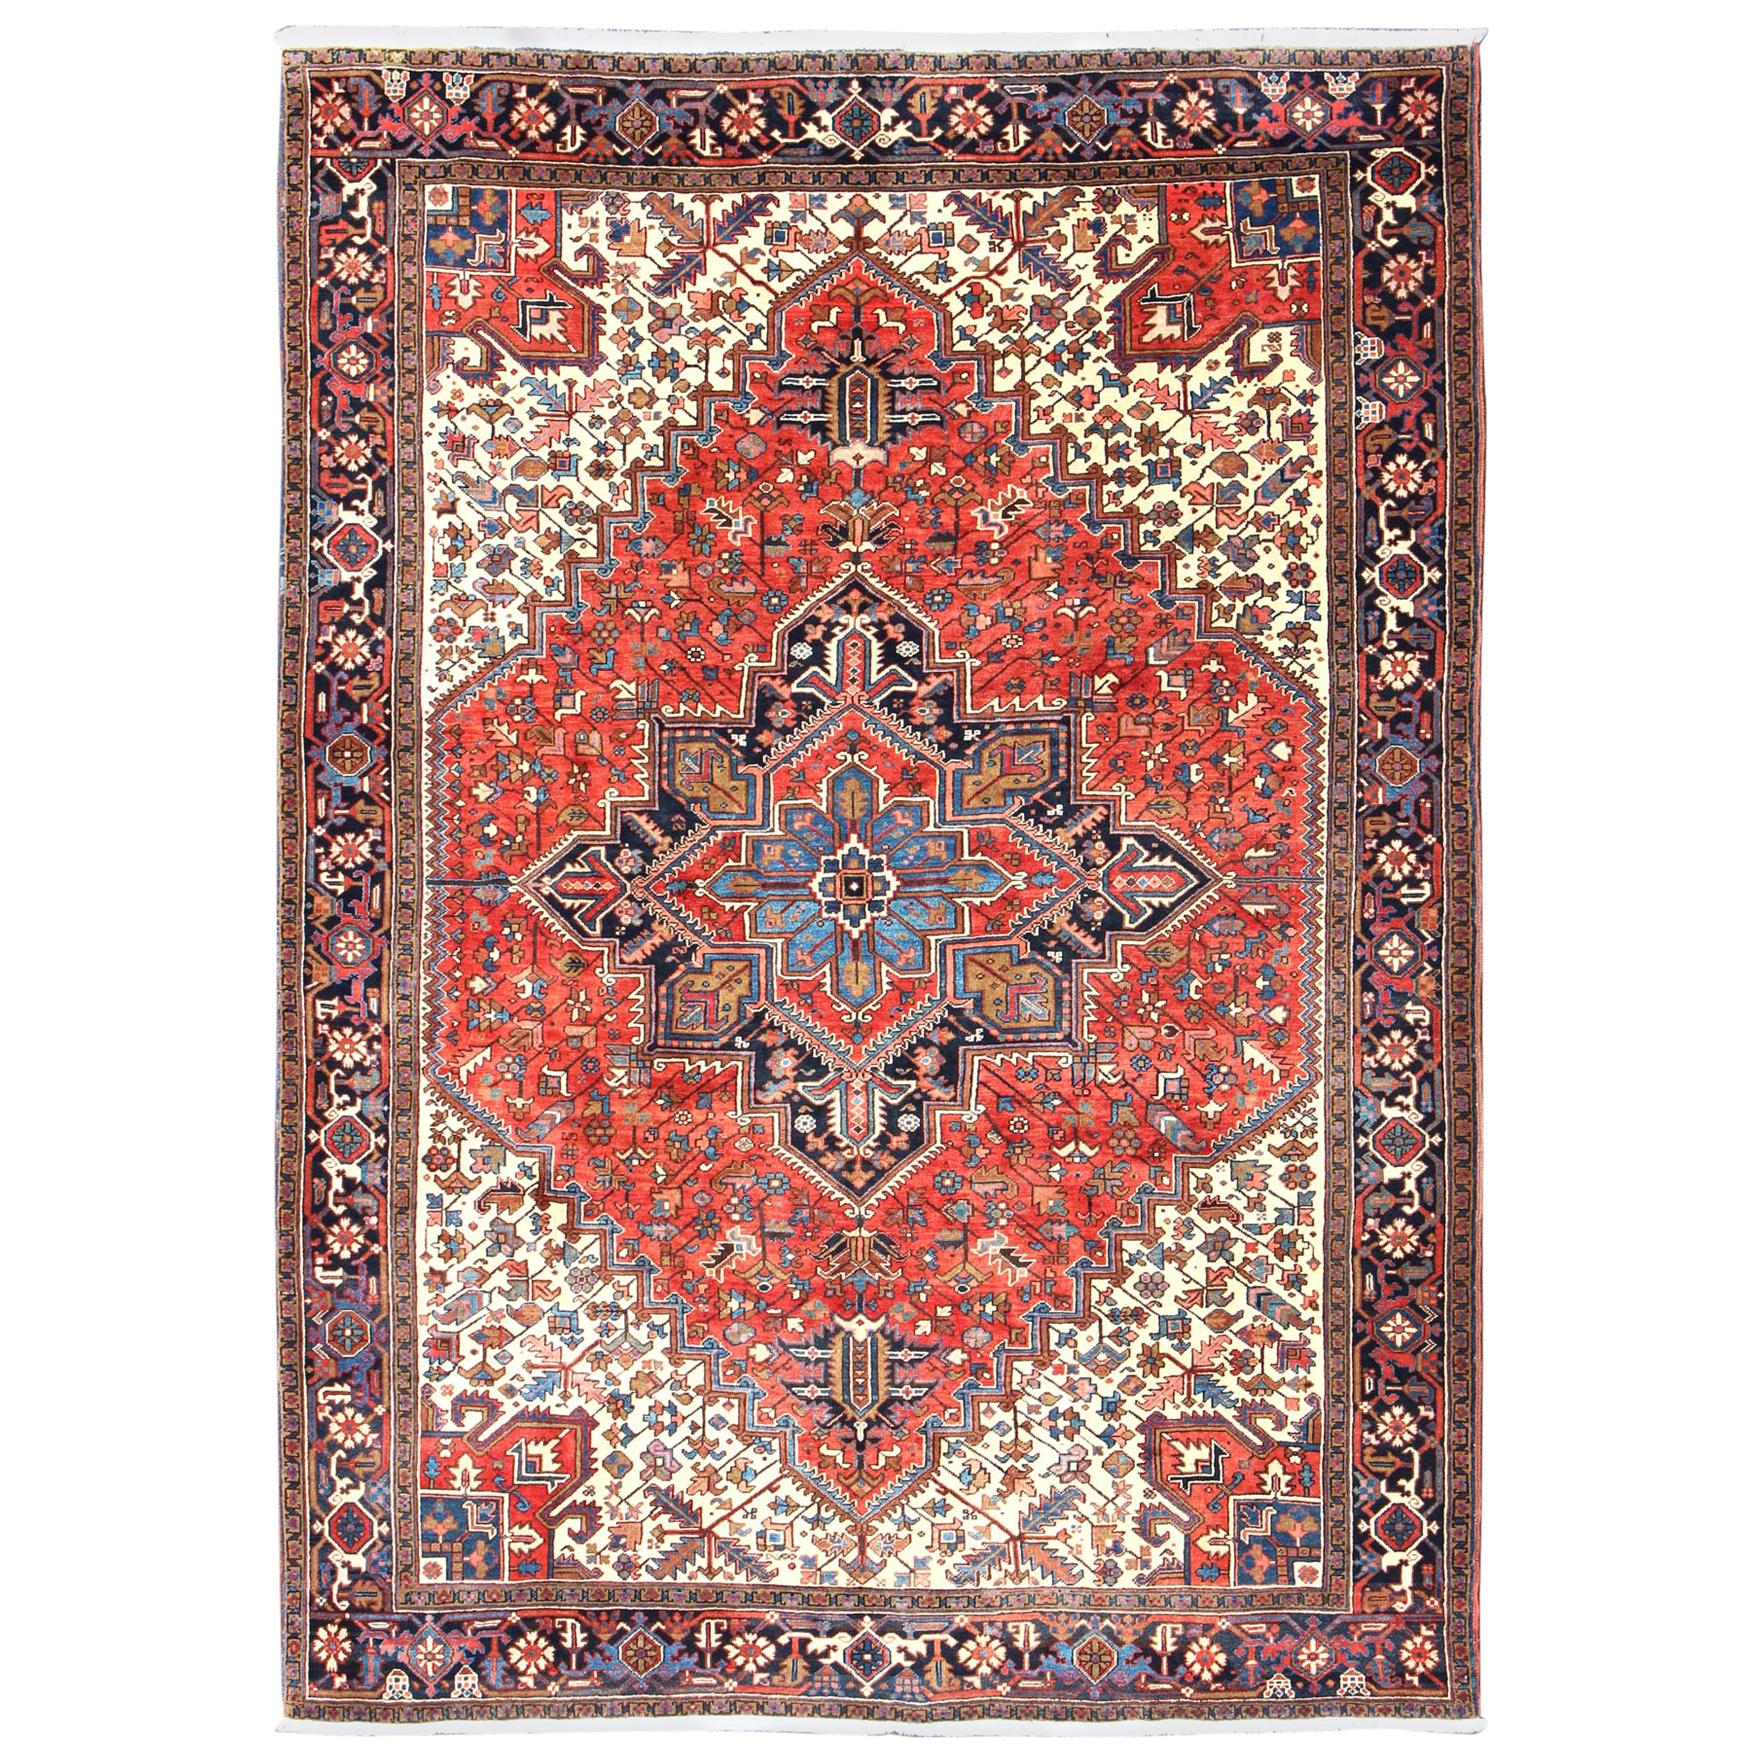 Semi Antique Persian Heriz Rug with Center Medallion Design in Rust Red and Blue